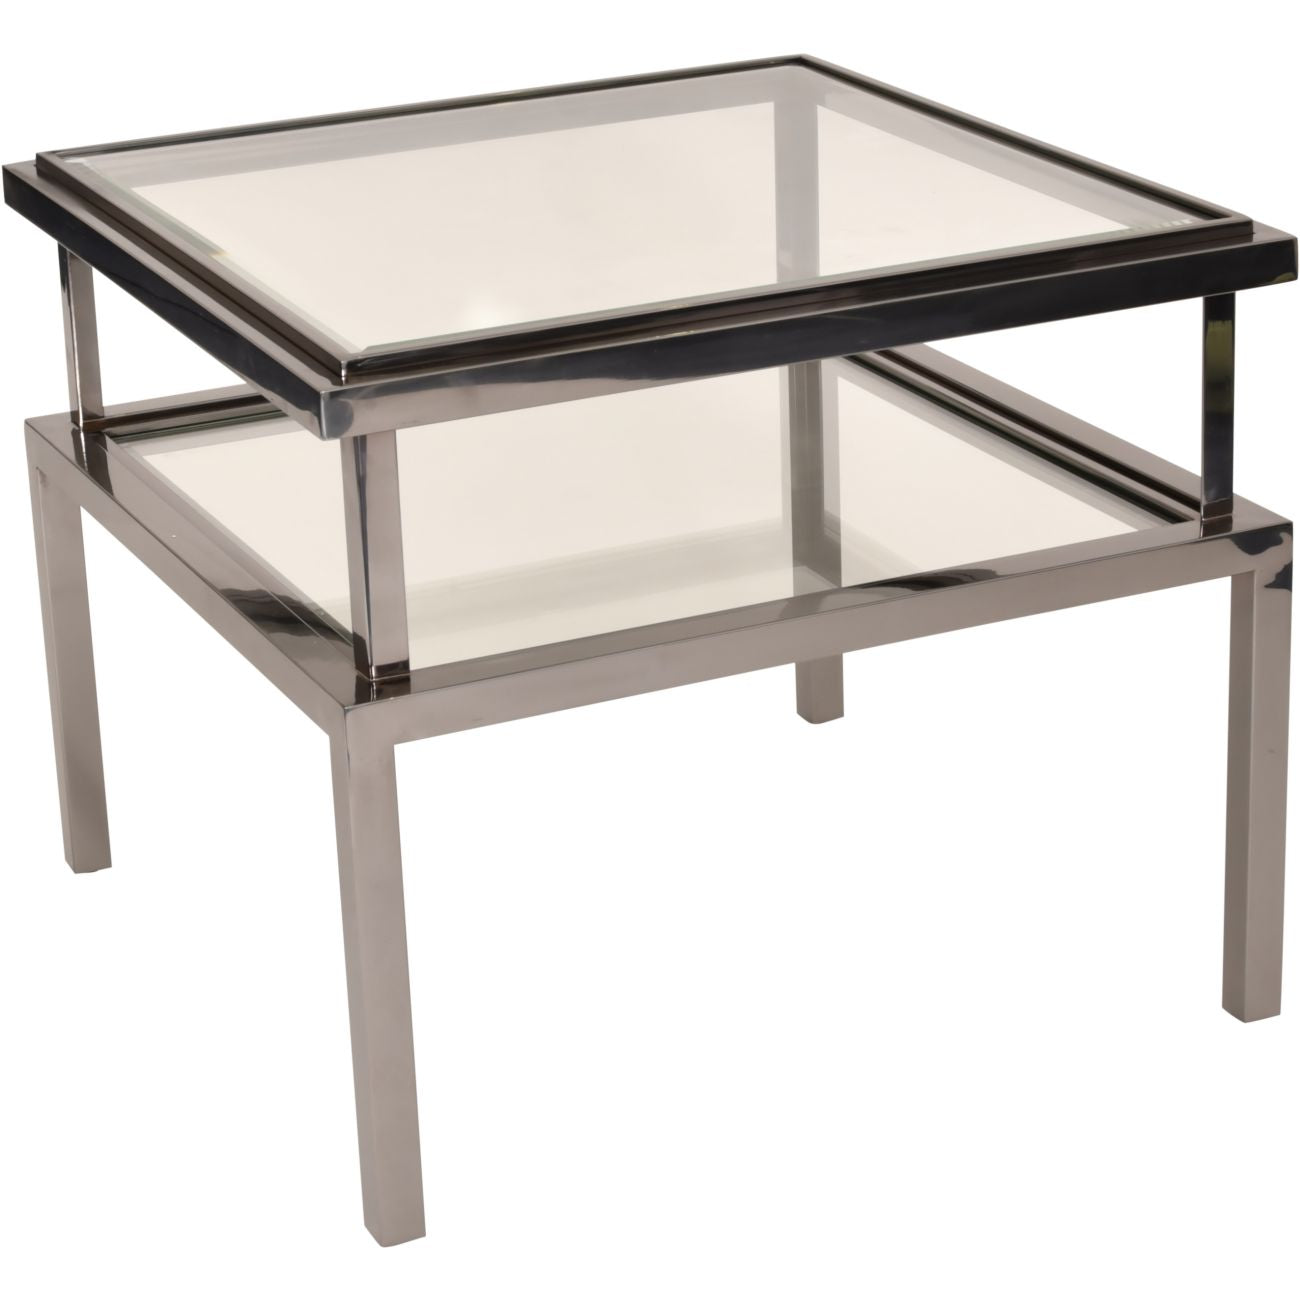 Knightsbridge Stainless Steel and Glass Square Side Table 65x65x55cm